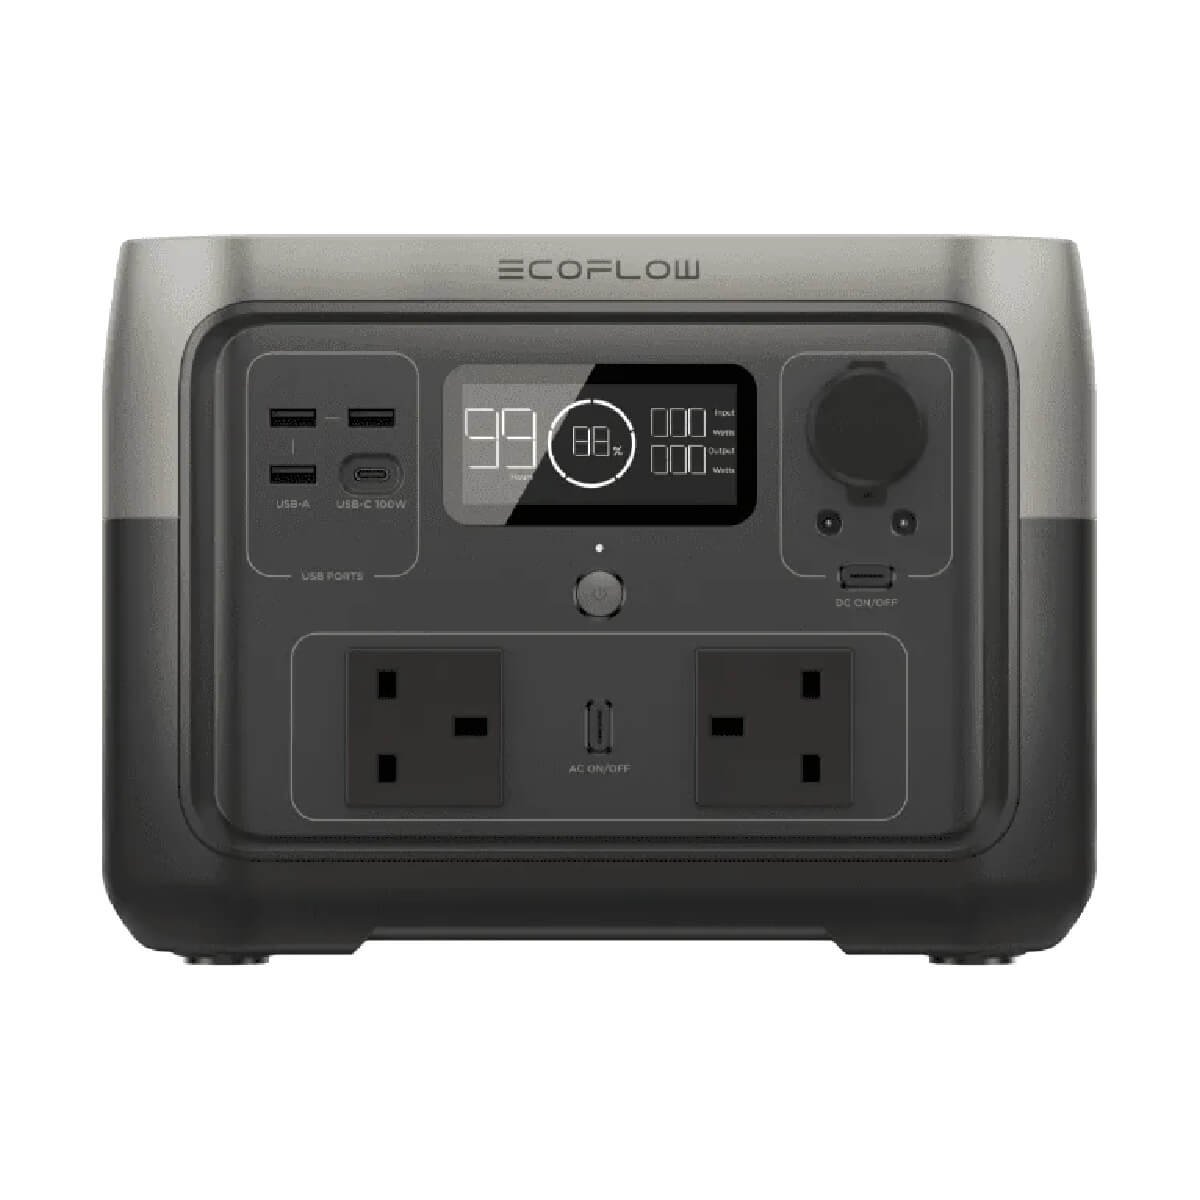 EcoFlow power station with display screen, multiple ports including USB and AC outlets, and a sleek, modern design.